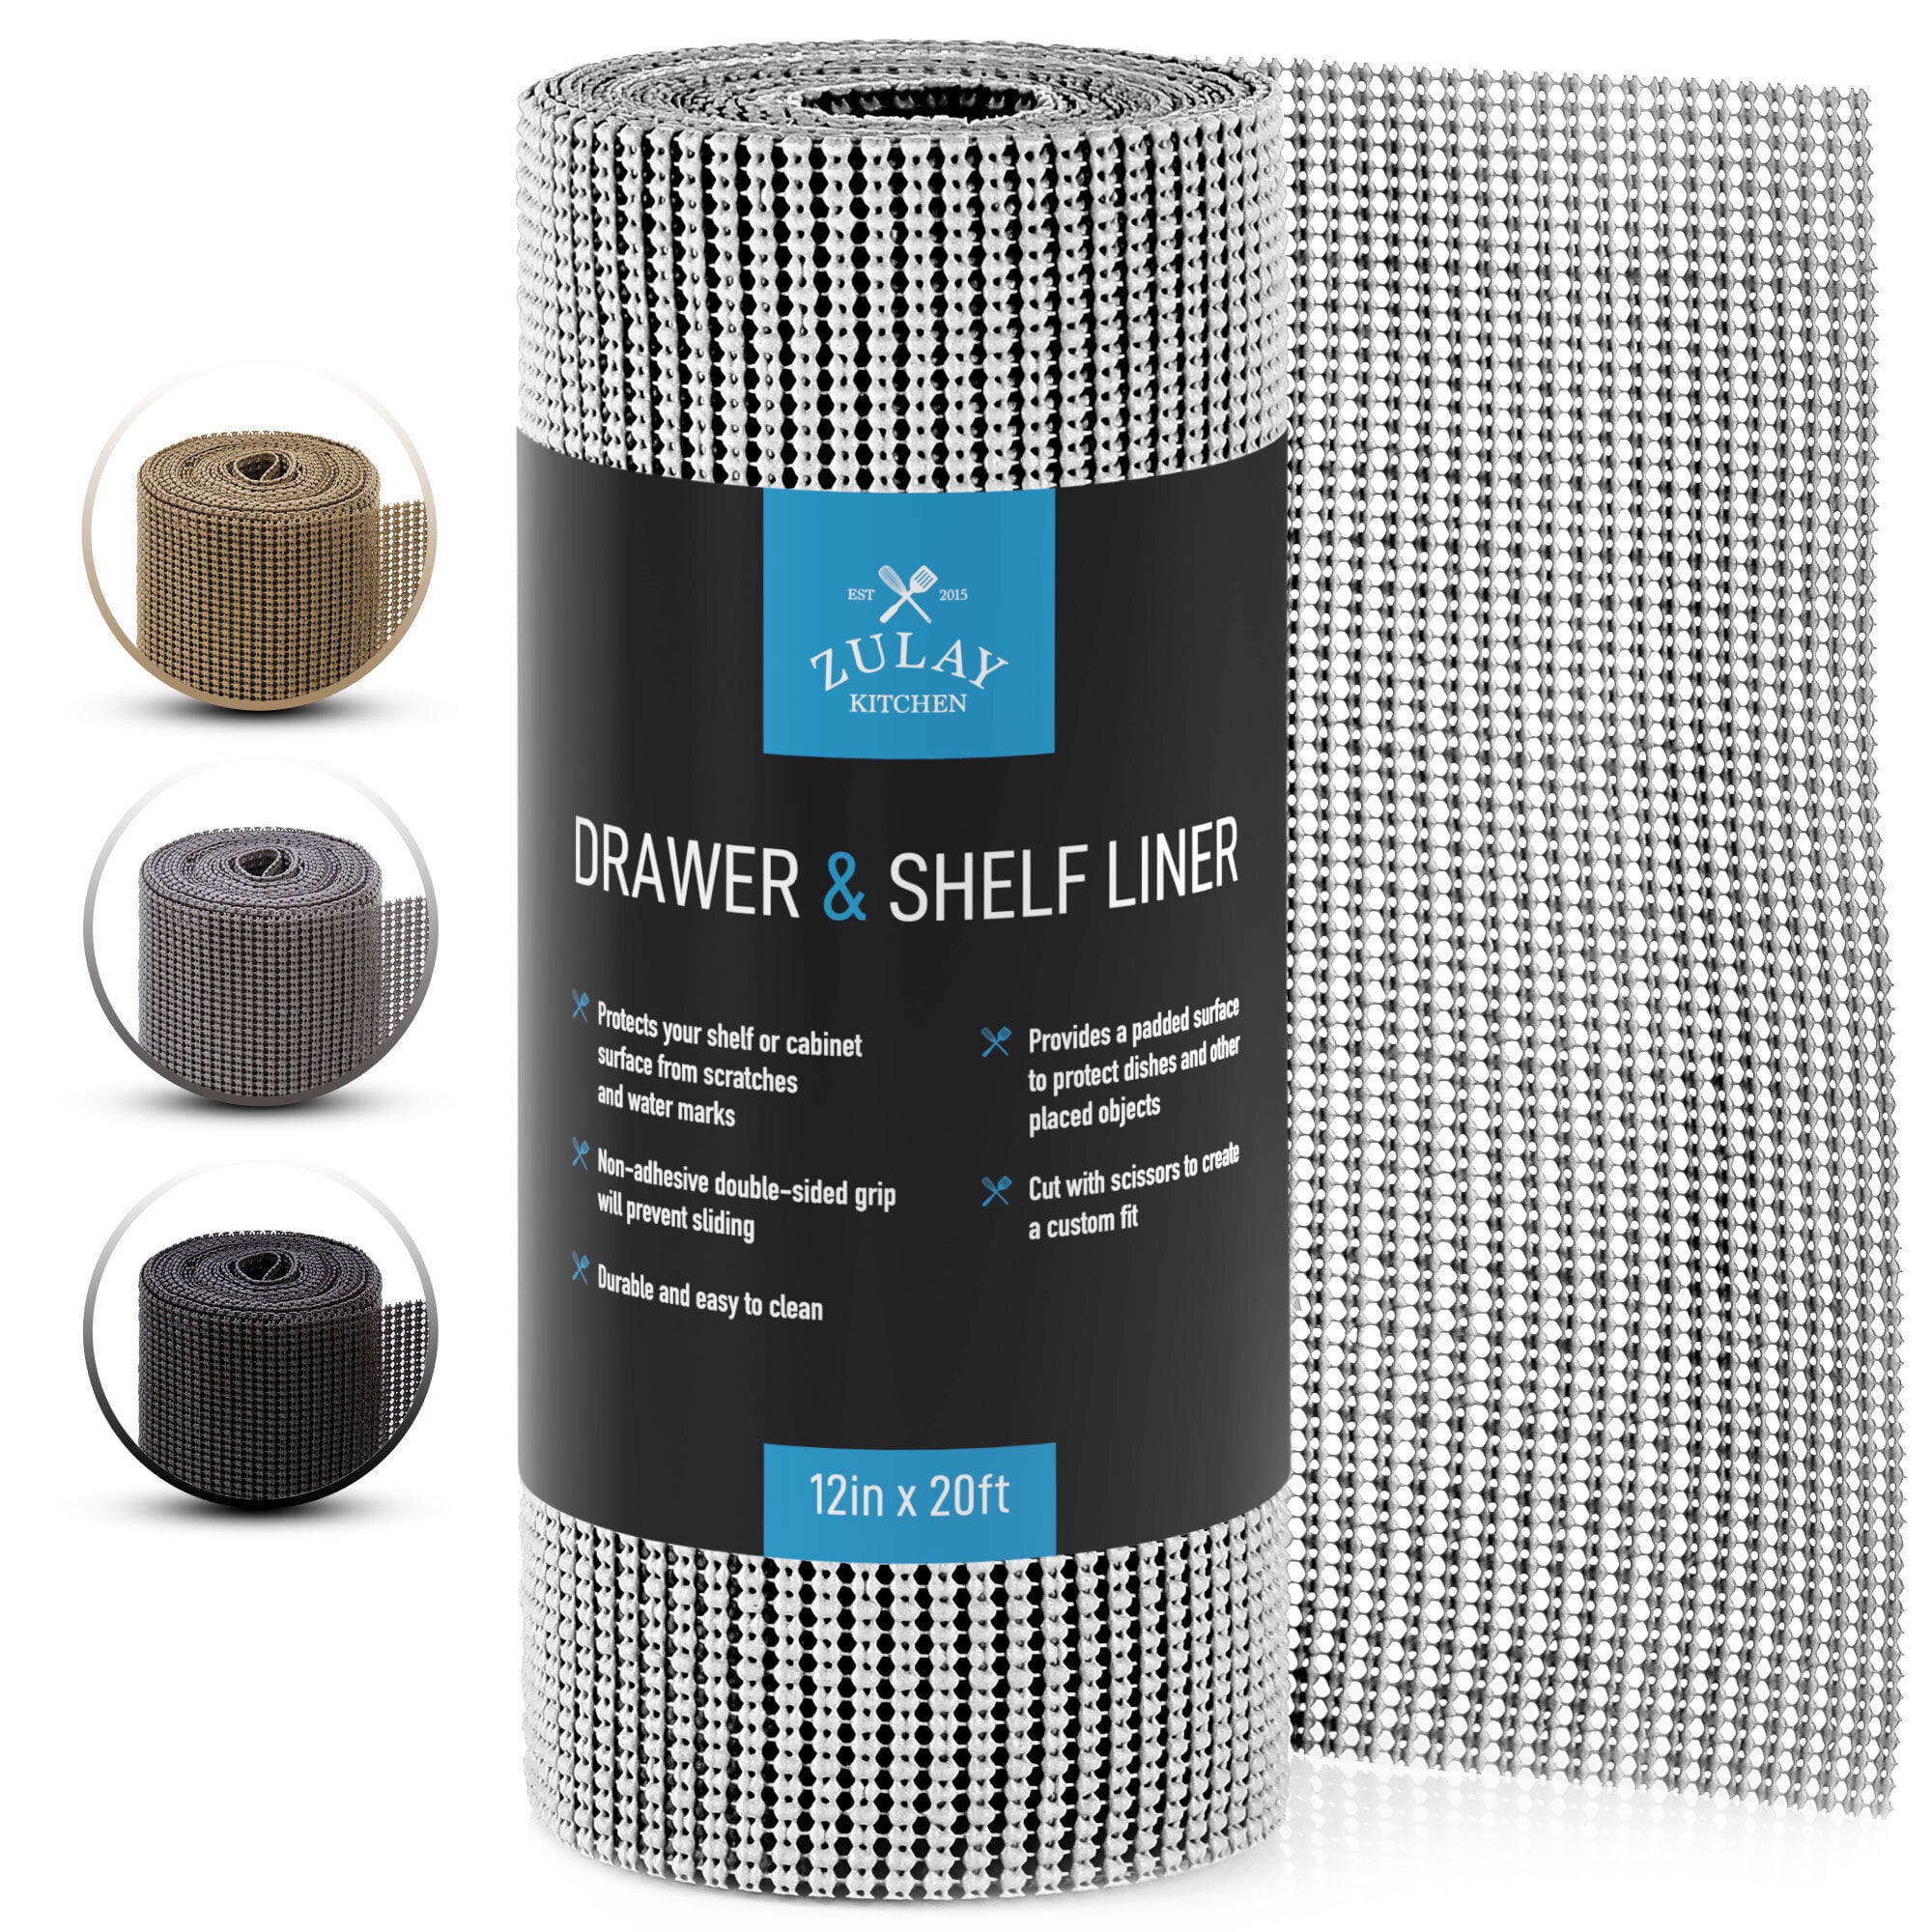  Shelf Cabinet Liner Non-Adhesive 12 in X 20 Ft, Strong Grip  Non Slip Shelving Liner for Kitchen Cabinets, Easy Install Storage,  Drawers, Shelves Kitchenware Tableware Light Gray Liners